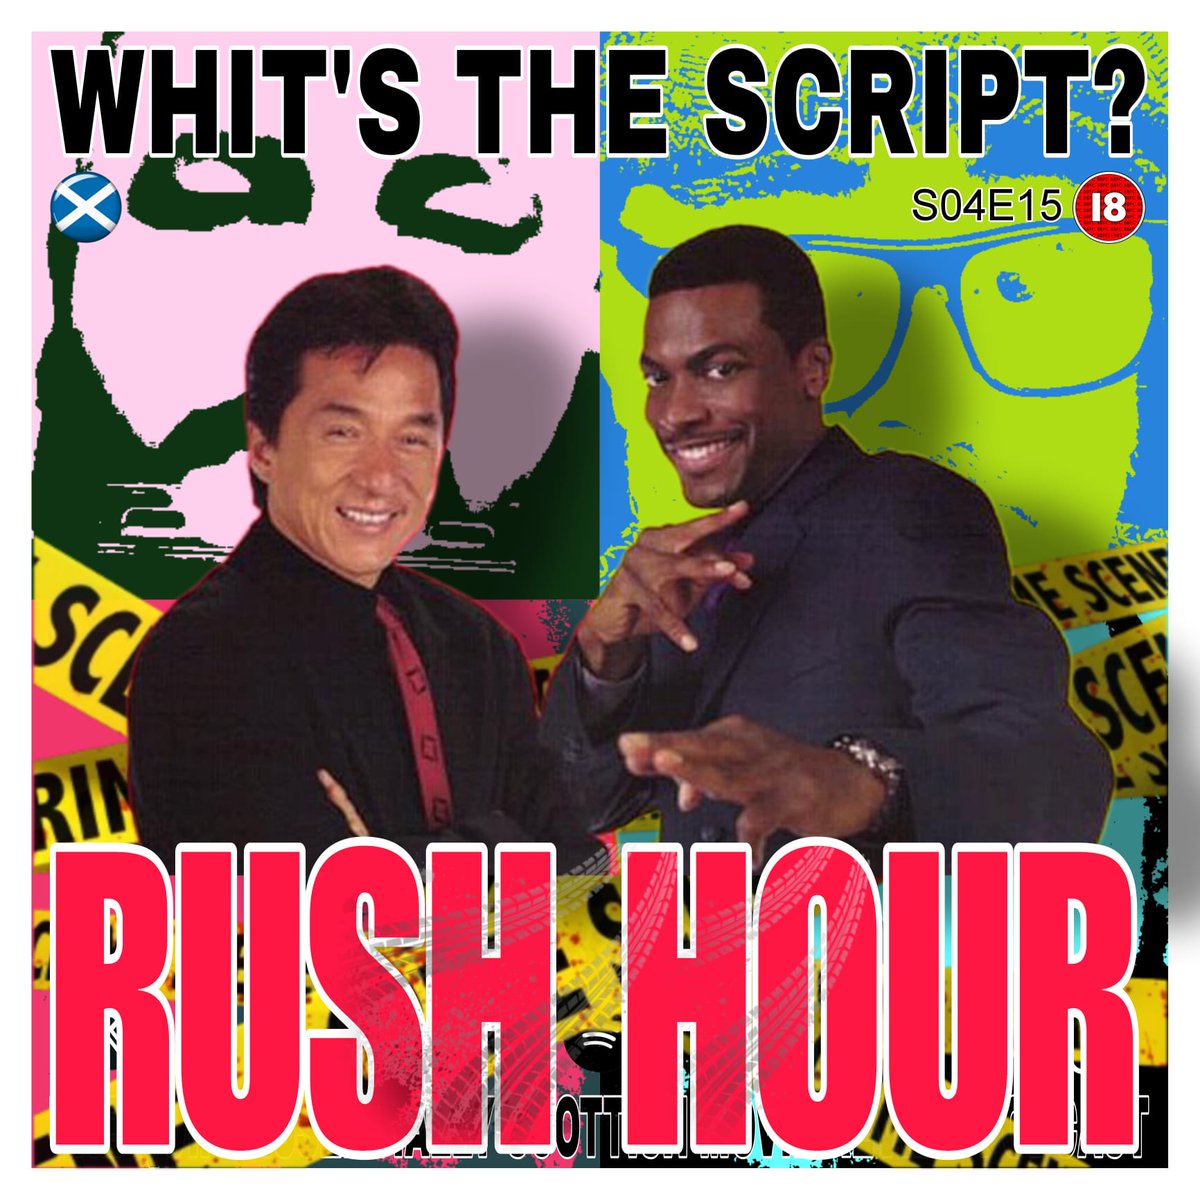 S04E15 Rush Hour available everywhere you go for podcasts #YouTube #MondayMotivation #Spotify @EyeOfJackieChan @ApplePodcasts @christuckerreal @GoodpodsHQ #podcastandchill #MovieReview #rushhour #jackiechan #christucker #action #comedy @newlinecinema @X #funny